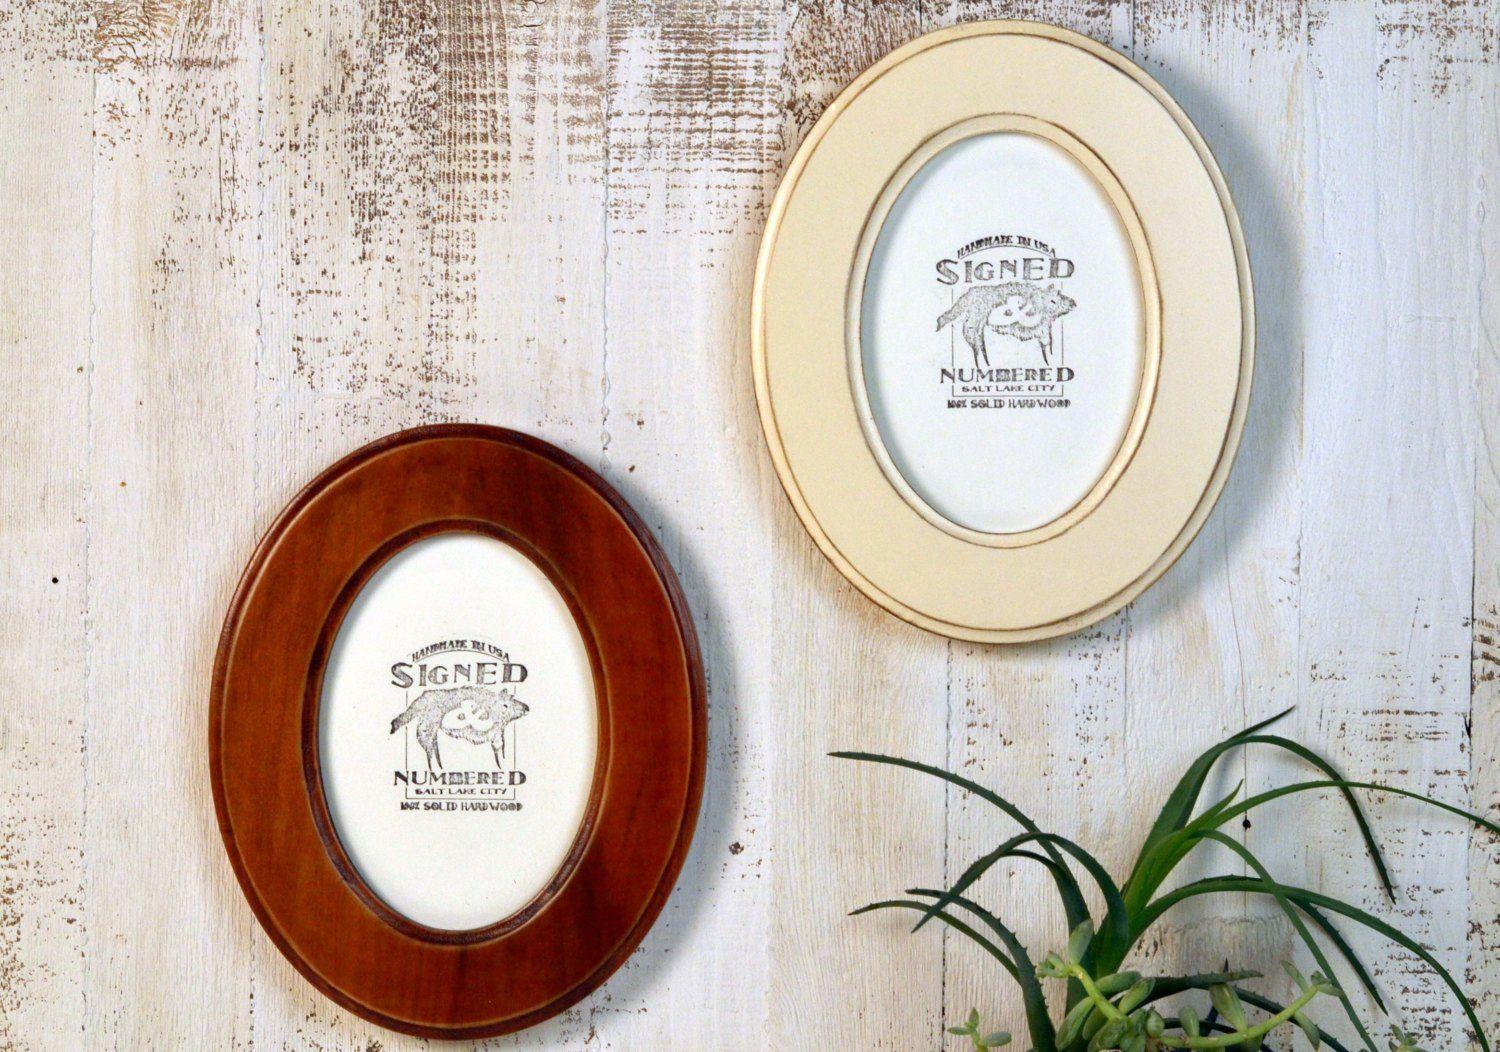 Ellipse-Shaped Logo - 5x7 Oval Opening Picture Frame Oval Shaped Outside in Finish COLOR ...